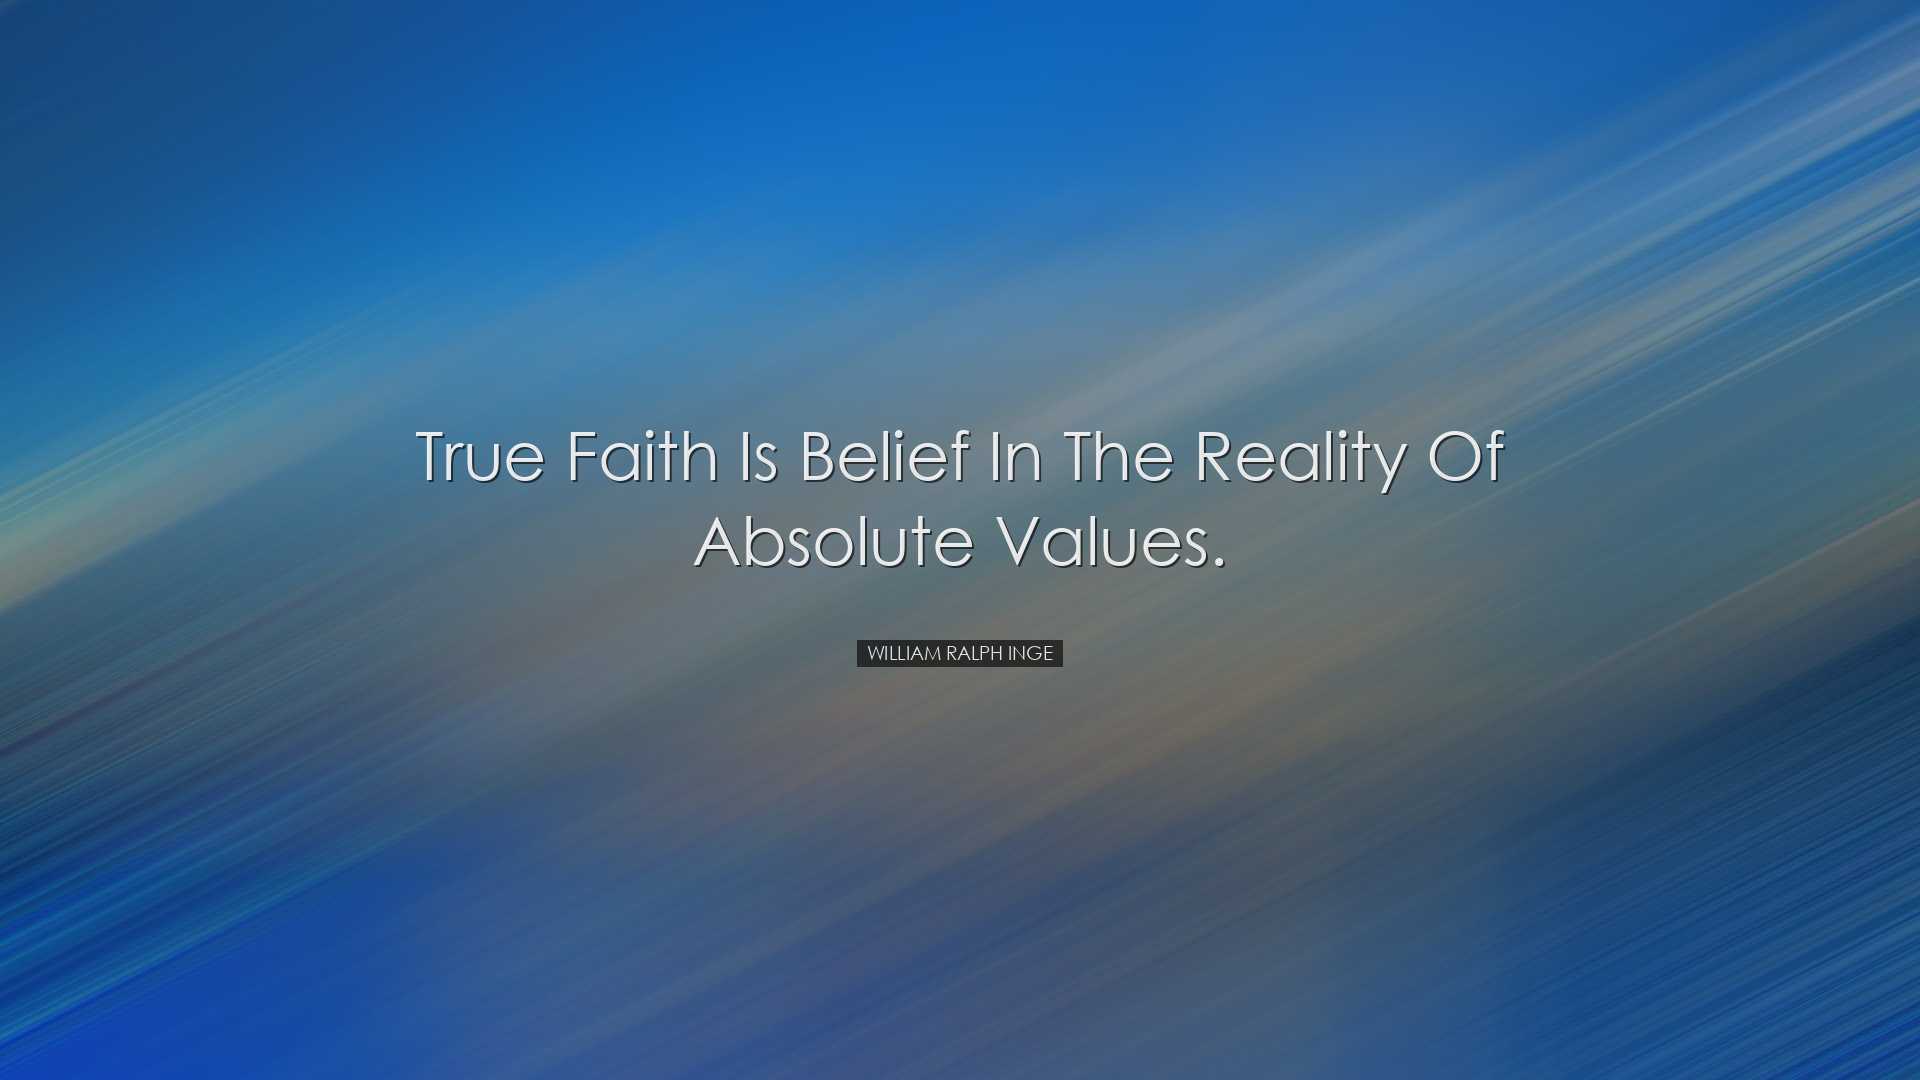 True faith is belief in the reality of absolute values. - William